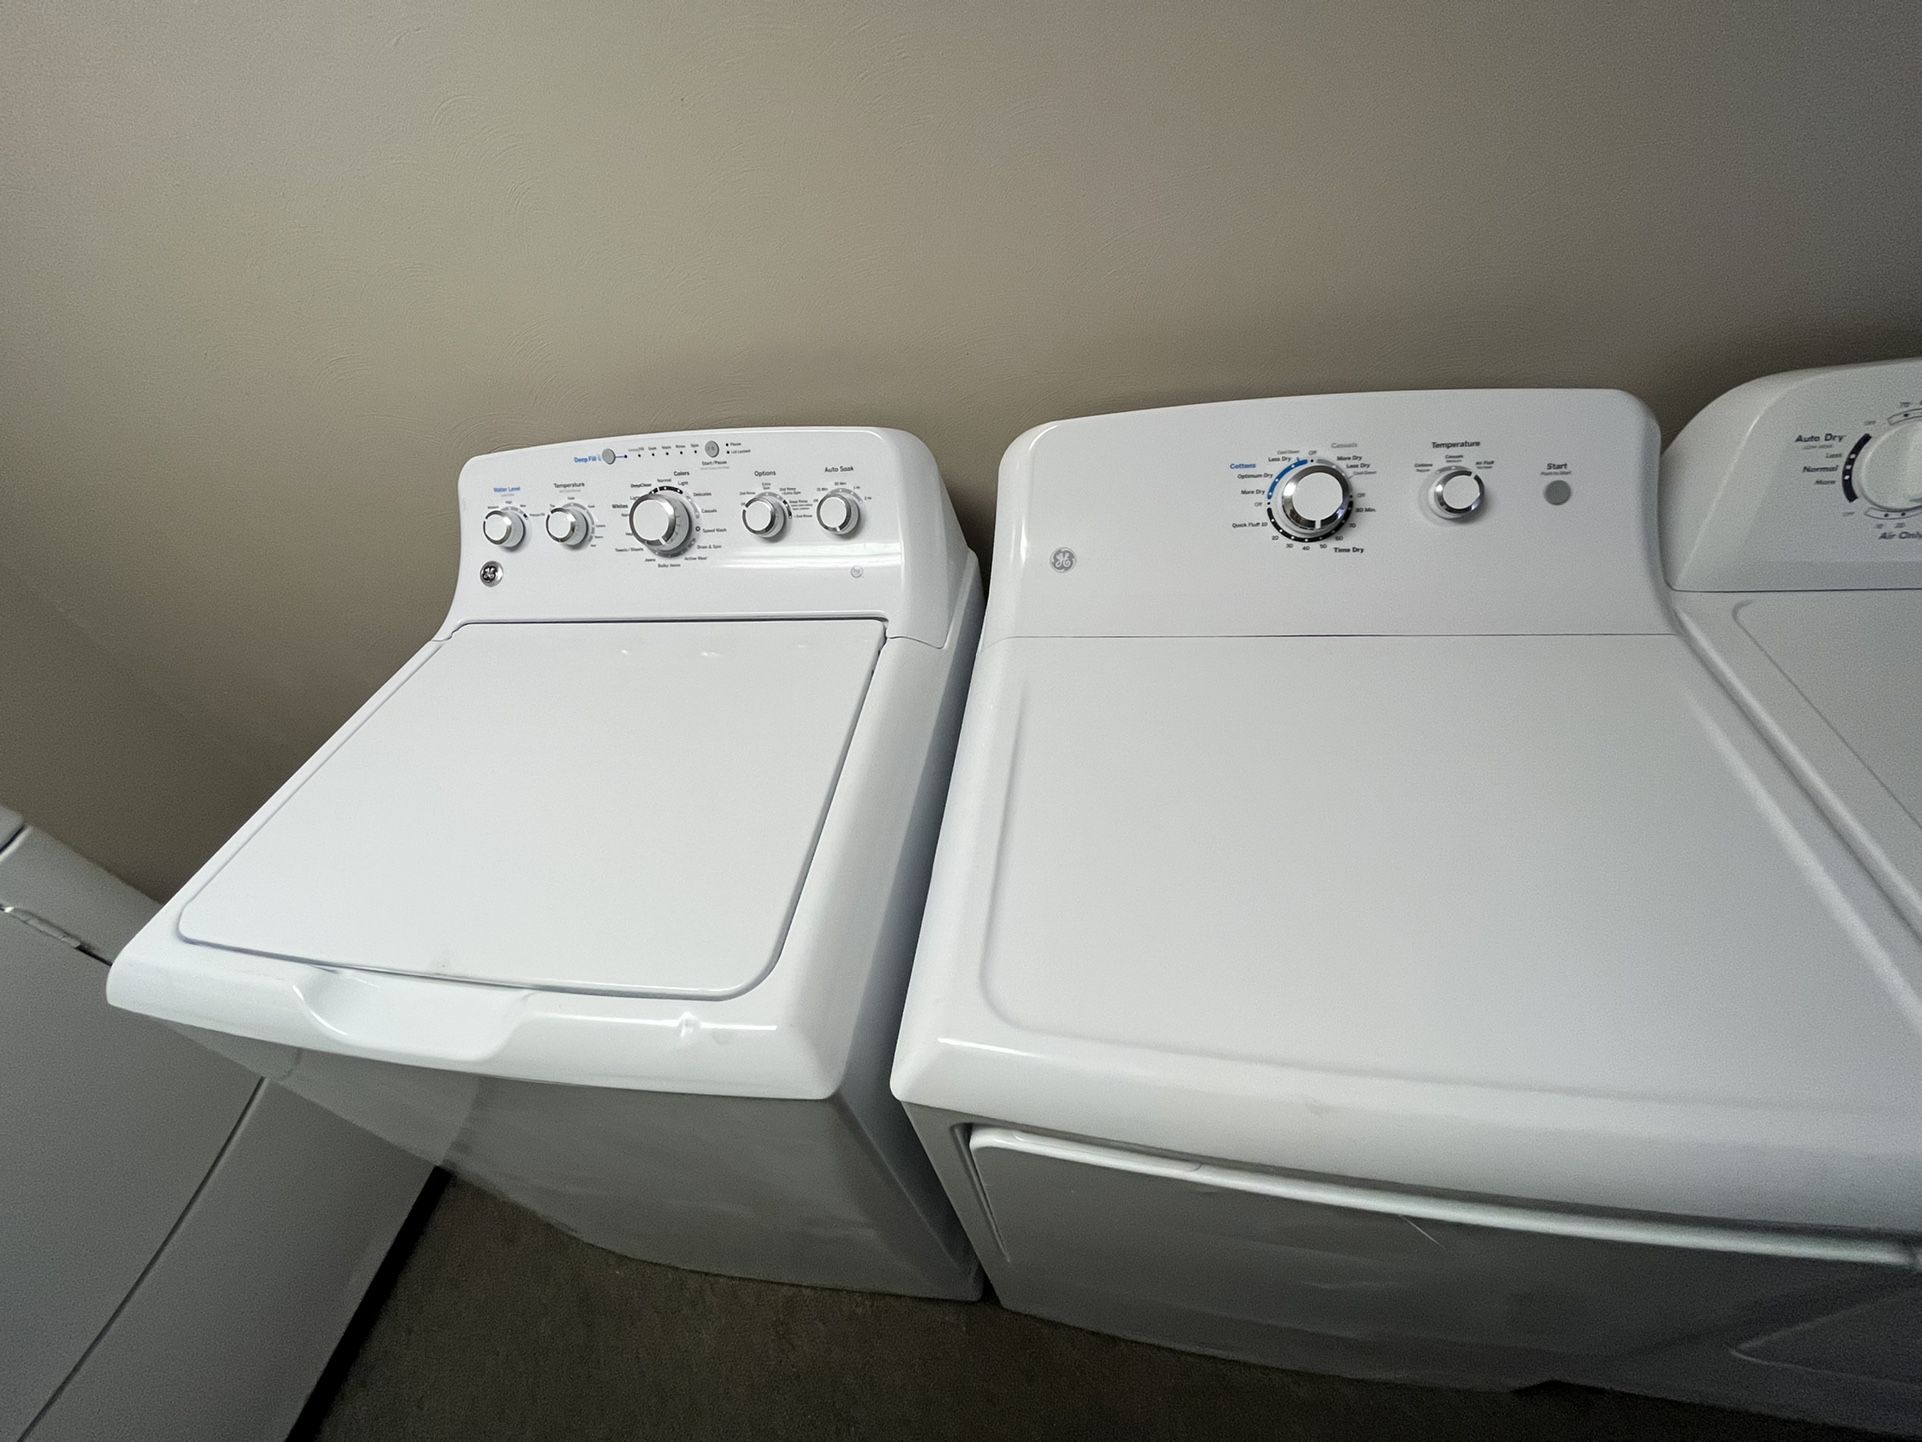 NEW GE WASHER WITH DRYER SET $675